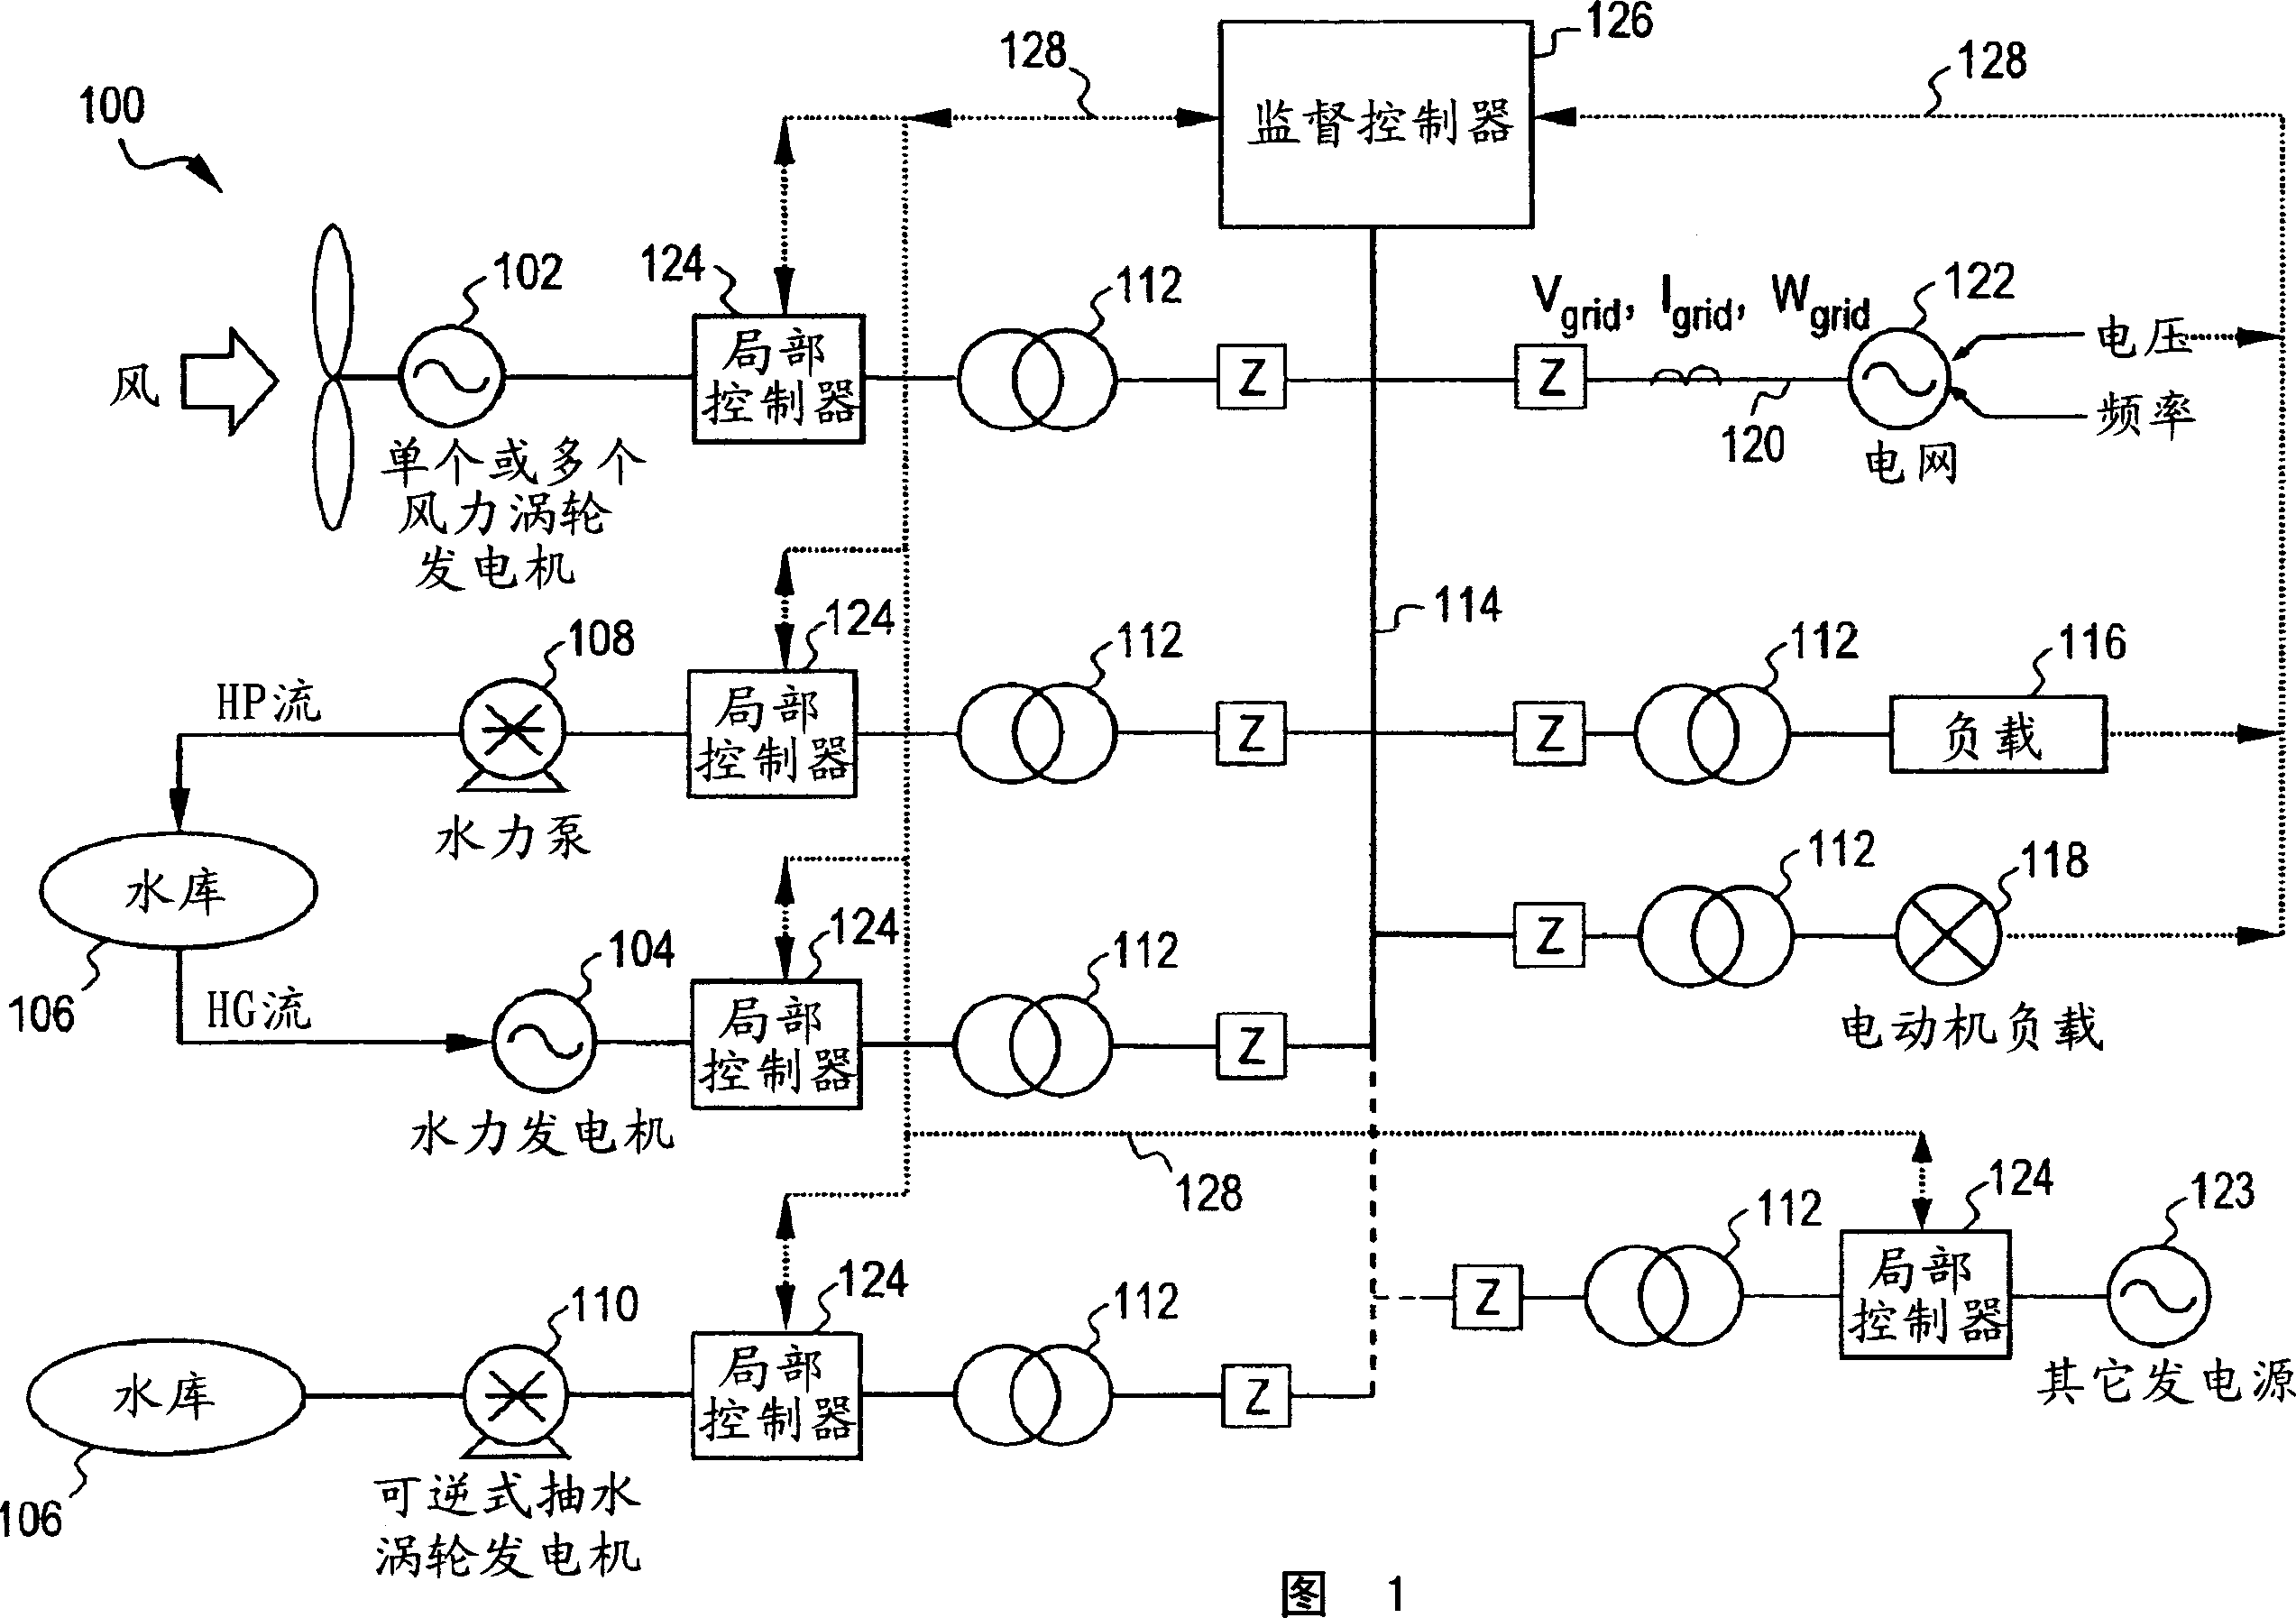 System and method for integrating wind power generation and pumped hydro energy storage systems